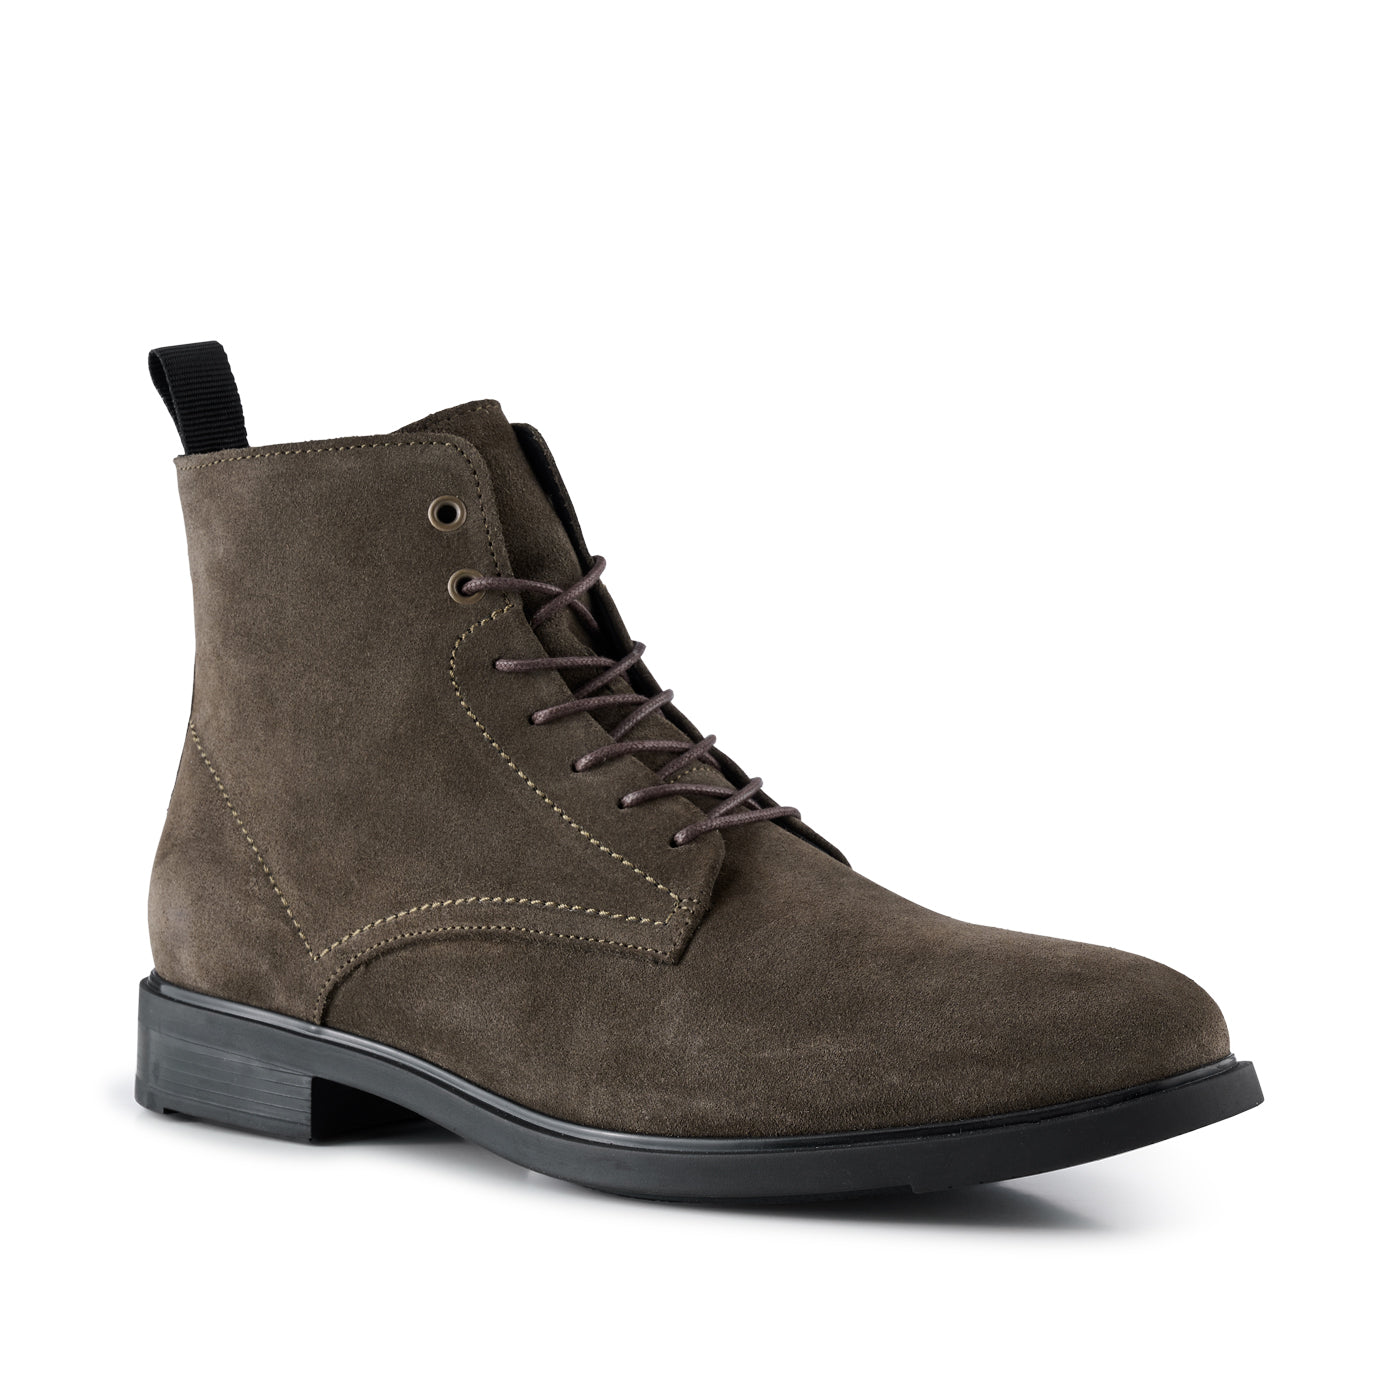 SHOE THE BEAR MENS Linea boot suede Boots 146 STONE